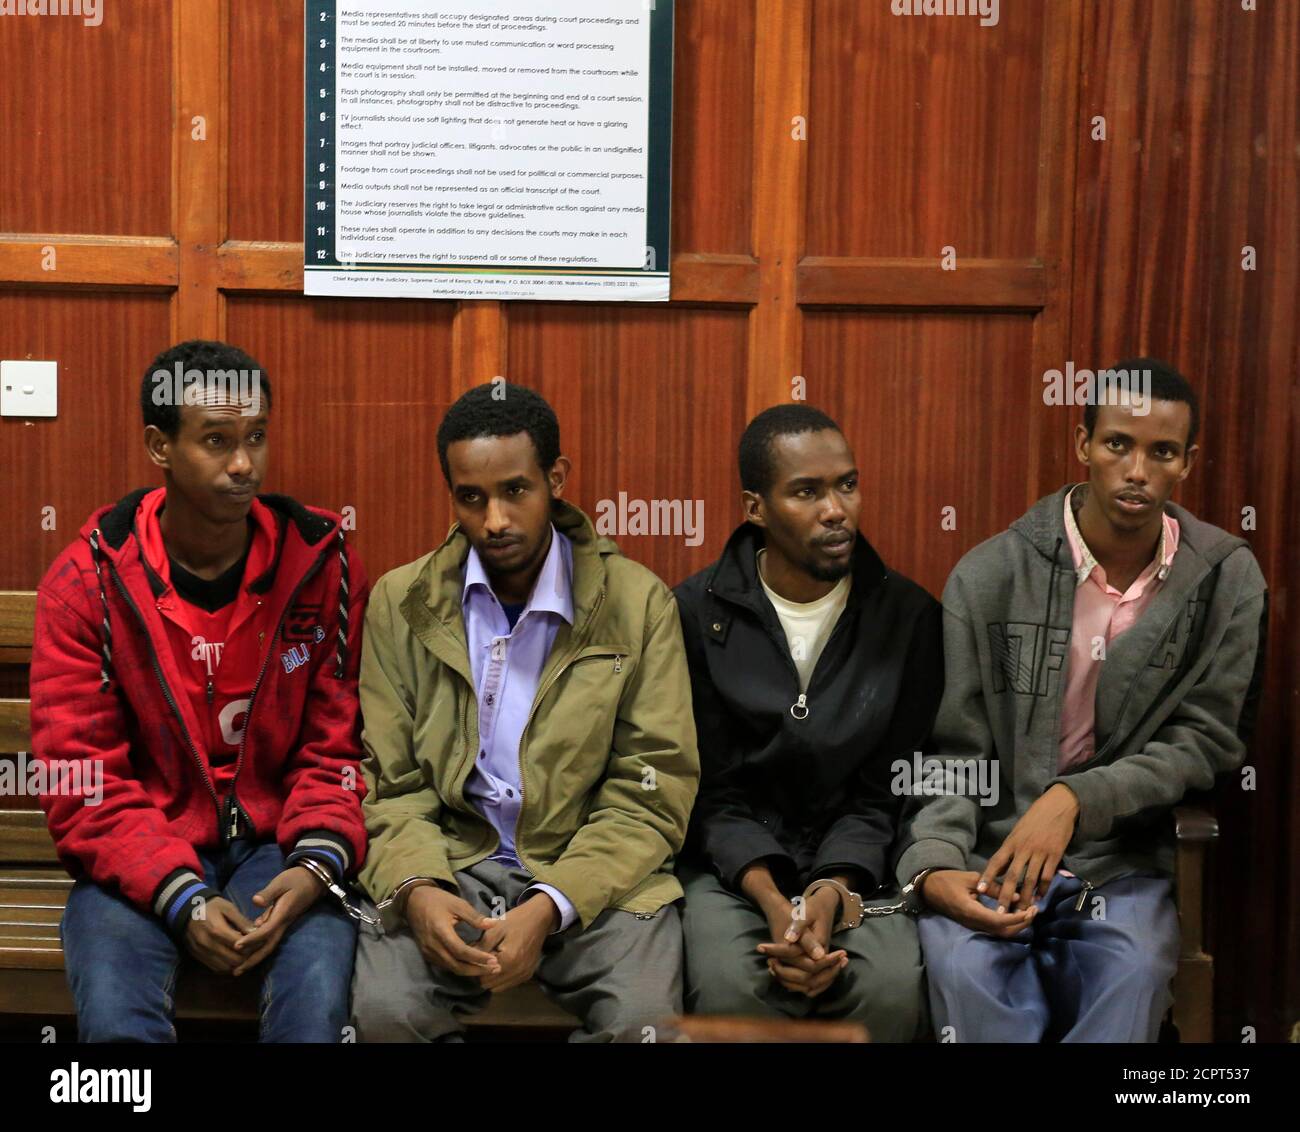 Somali men Mohamed Ahmed Abdi (L-R), Liban Abdullah Omar, Adan Mohamed Ibrahim and Hussein Hassan appear at the High Court for bail application in capital Nairobi 12, 2013. A Kenyan court charged the four Somali men last Monday with terrorist offences for helping al Qaeda-linked militants carry out an attack on a shopping mall in Nairobi that killed 67 people. Few details have emerged so far about the how the September attack was masterminded or how gunmen held off Kenyan security forces for four days in the Westgate mall. The assault was claimed by the Somali Islamist group al Shabaab. REUTER Stock Photo